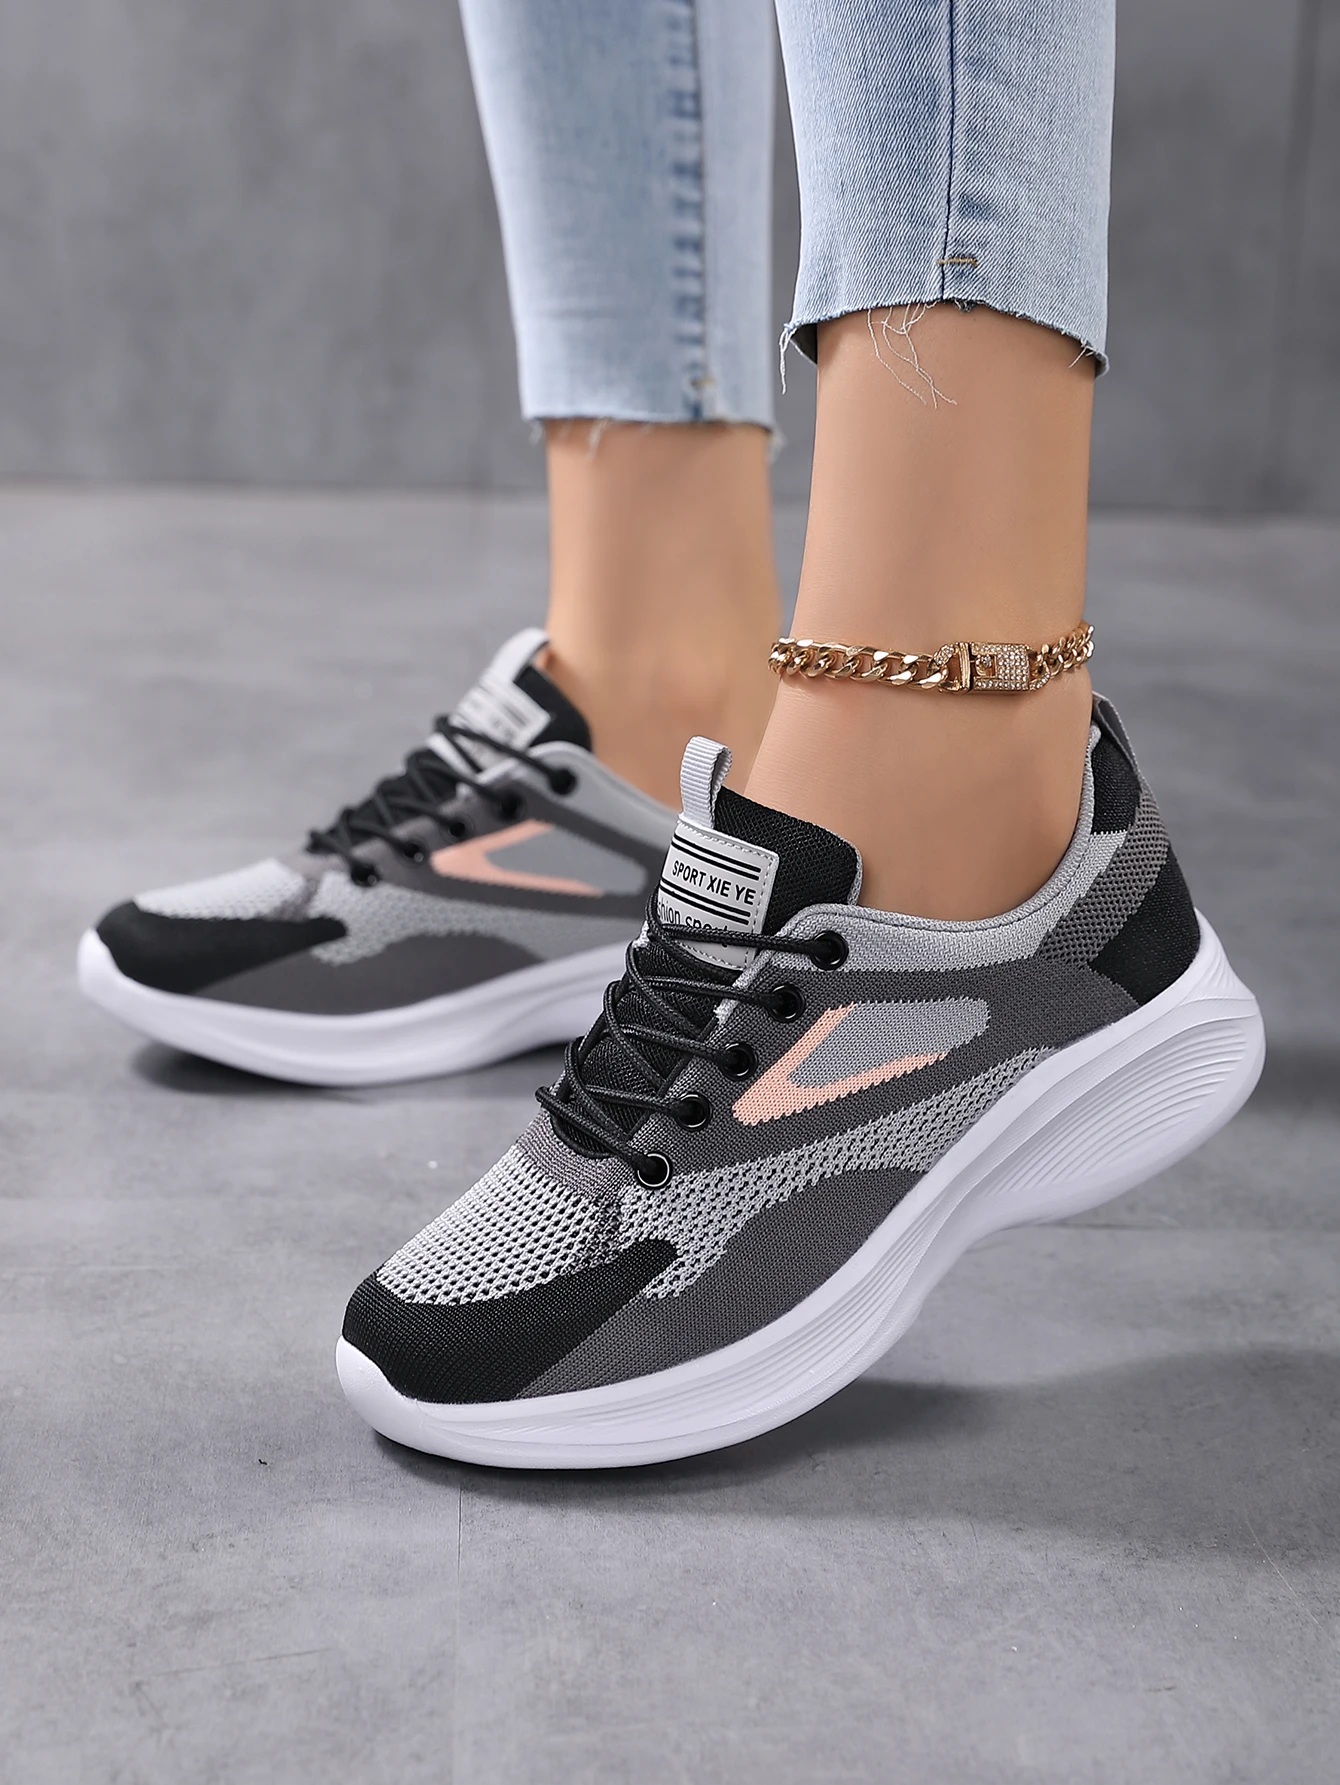 

Sneakers Breathable Women Walking Shoes Slip on Trainers Women's Comfortable Casual Ladies Athletic Shoes Thick Bottom 6238